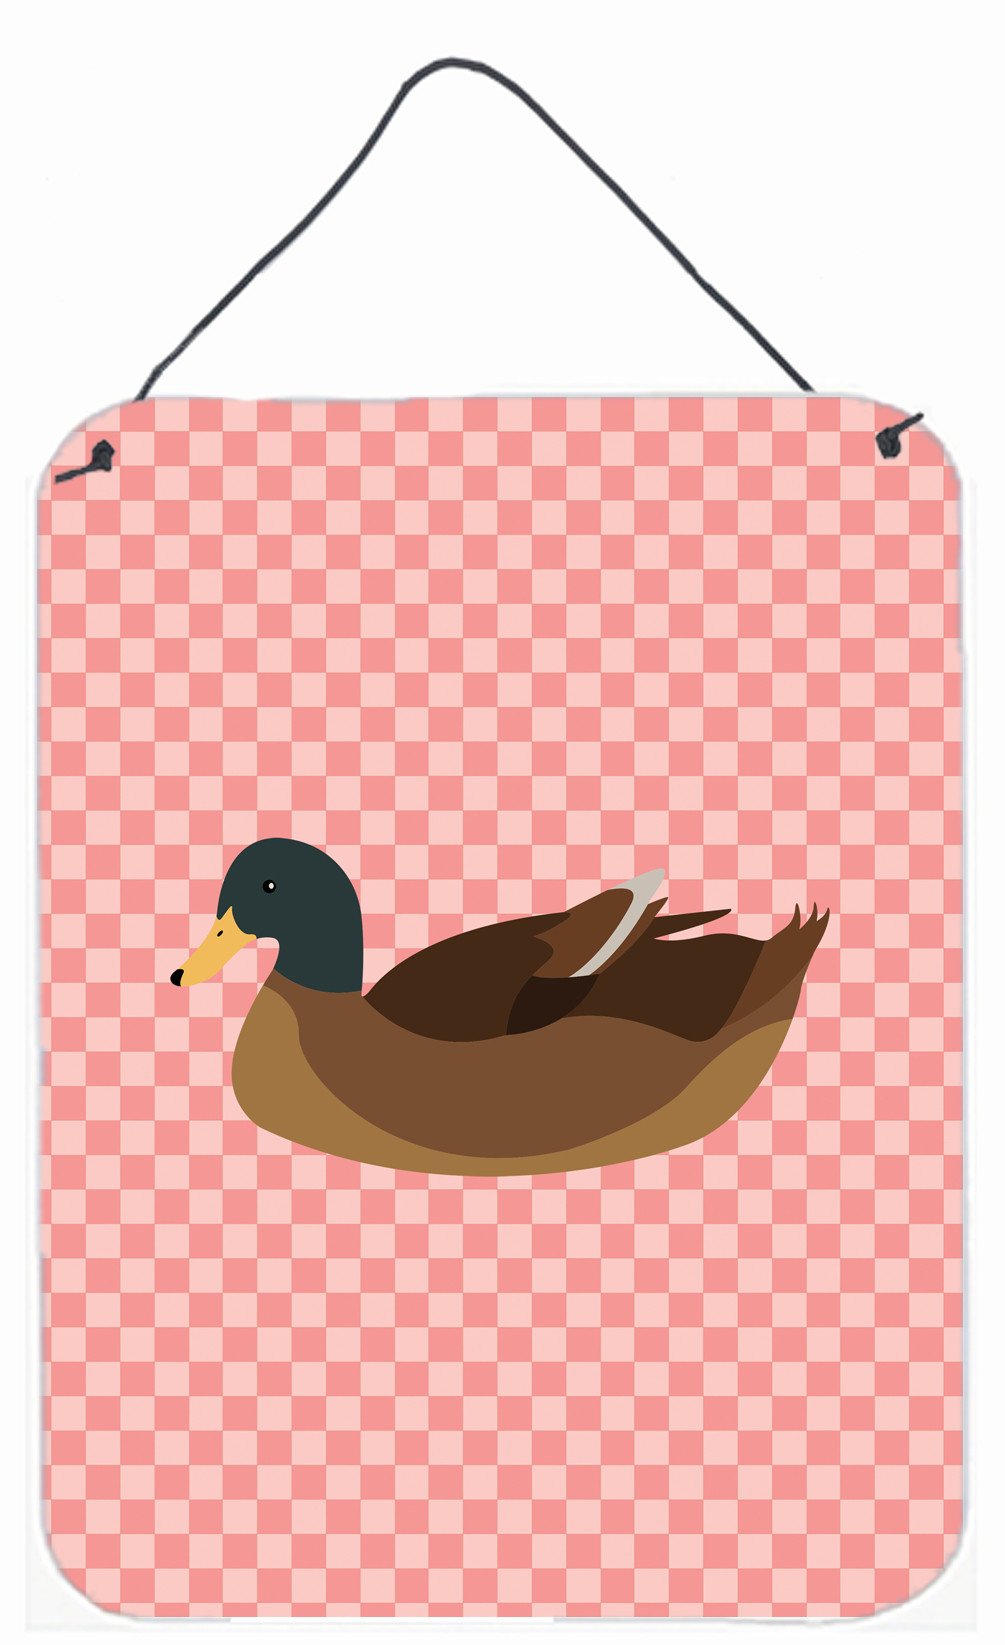 Khaki Campbell Duck Pink Check Wall or Door Hanging Prints BB7866DS1216 by Caroline's Treasures